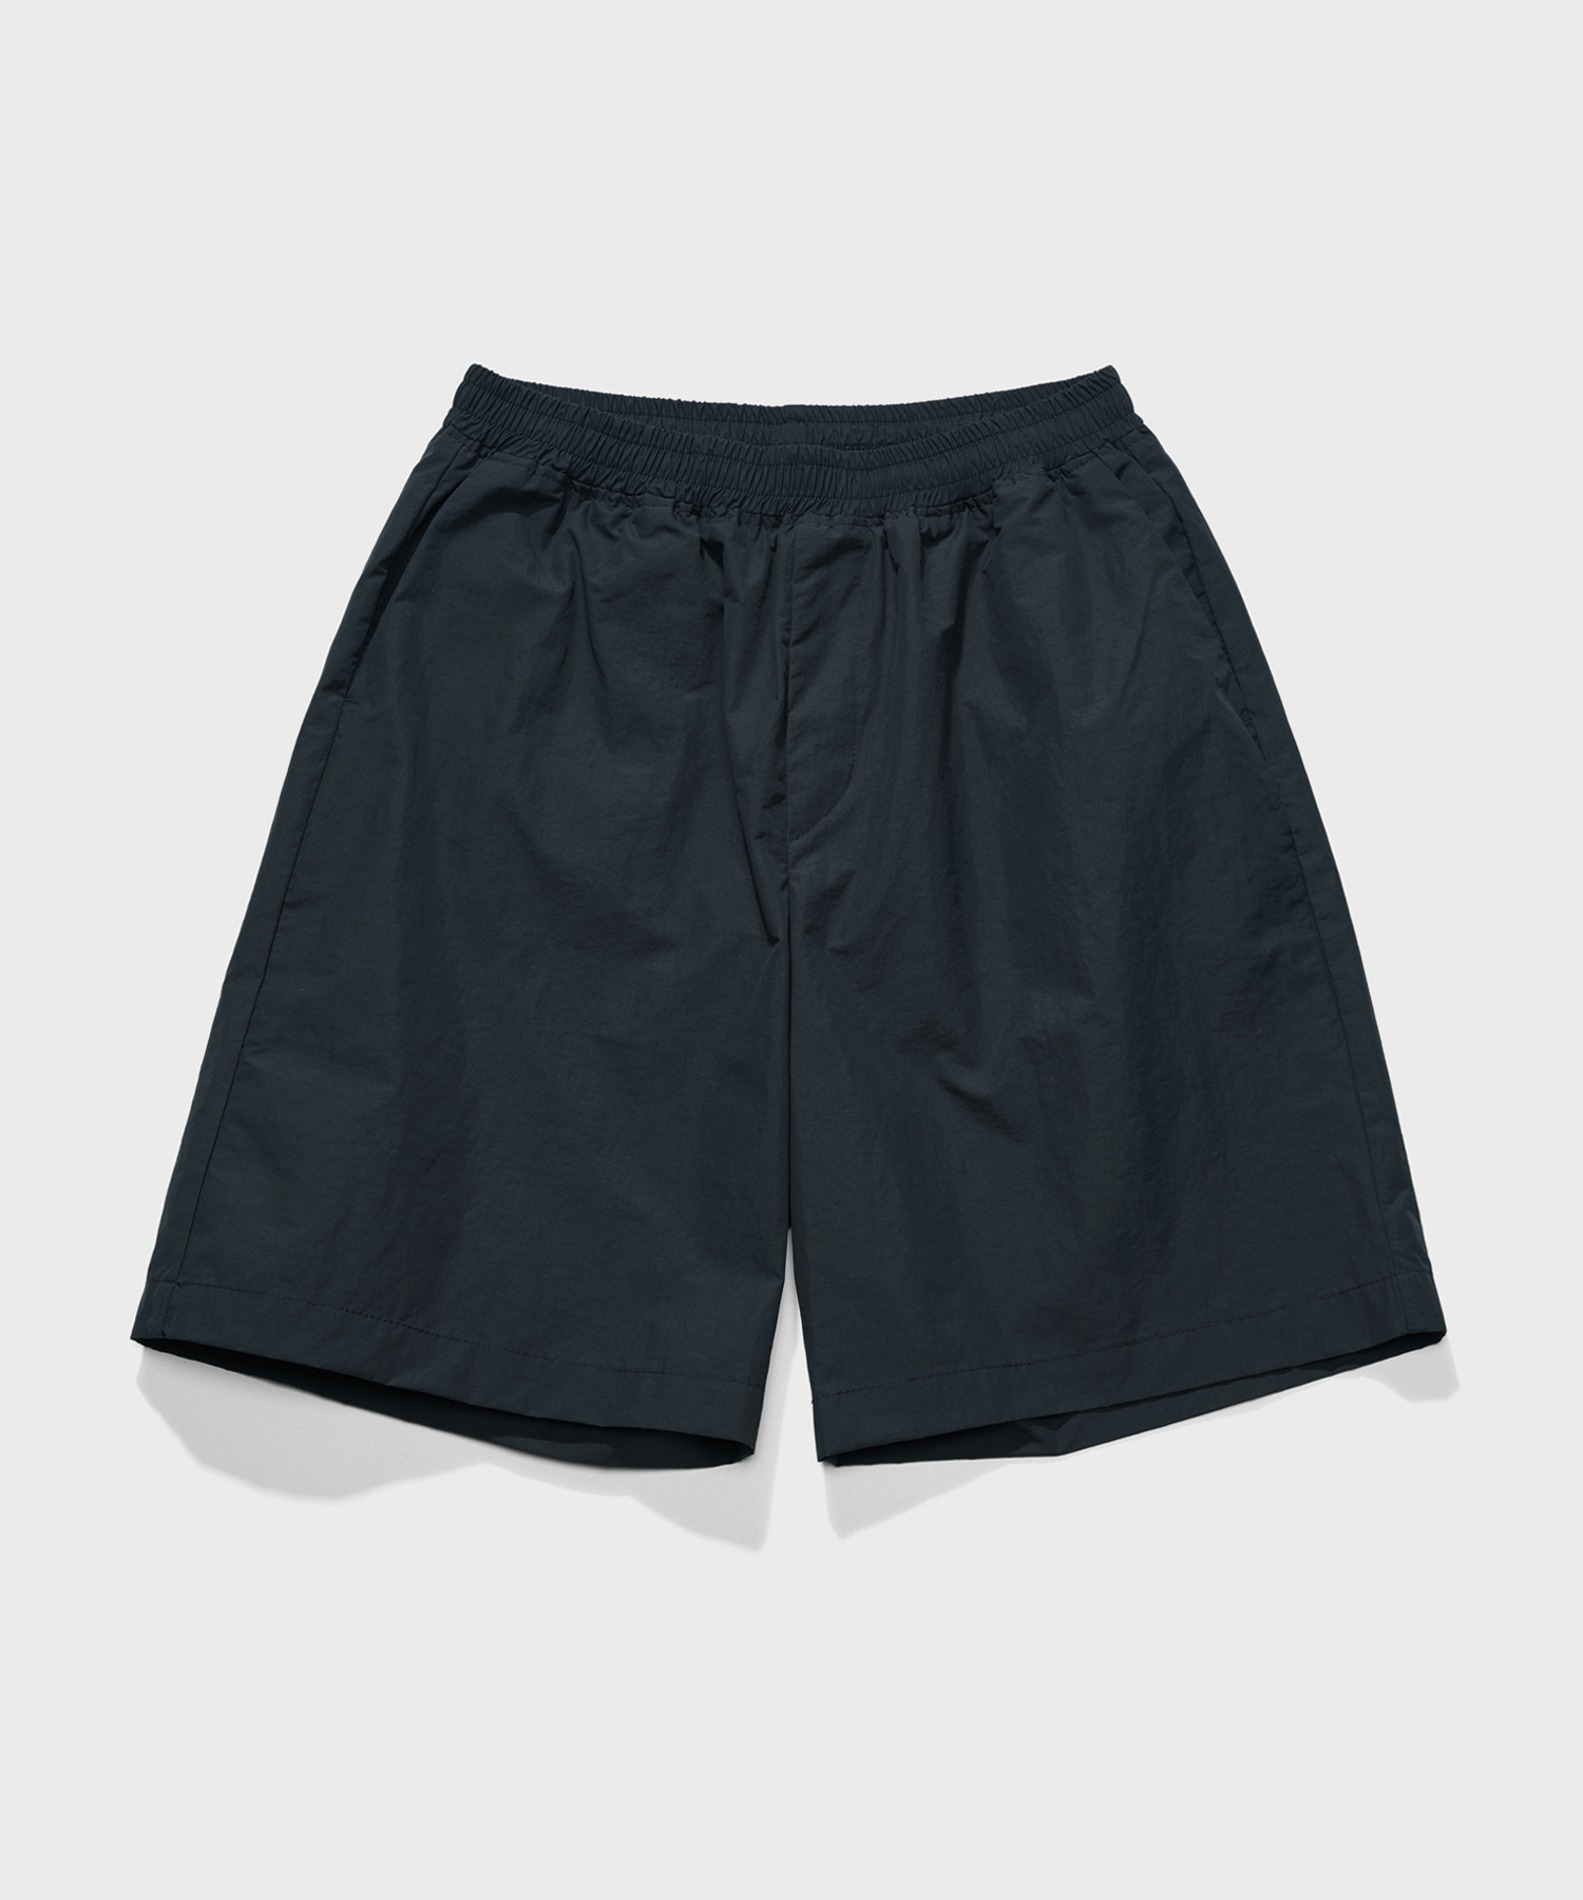 office casual sports banding half pants_Charcoal